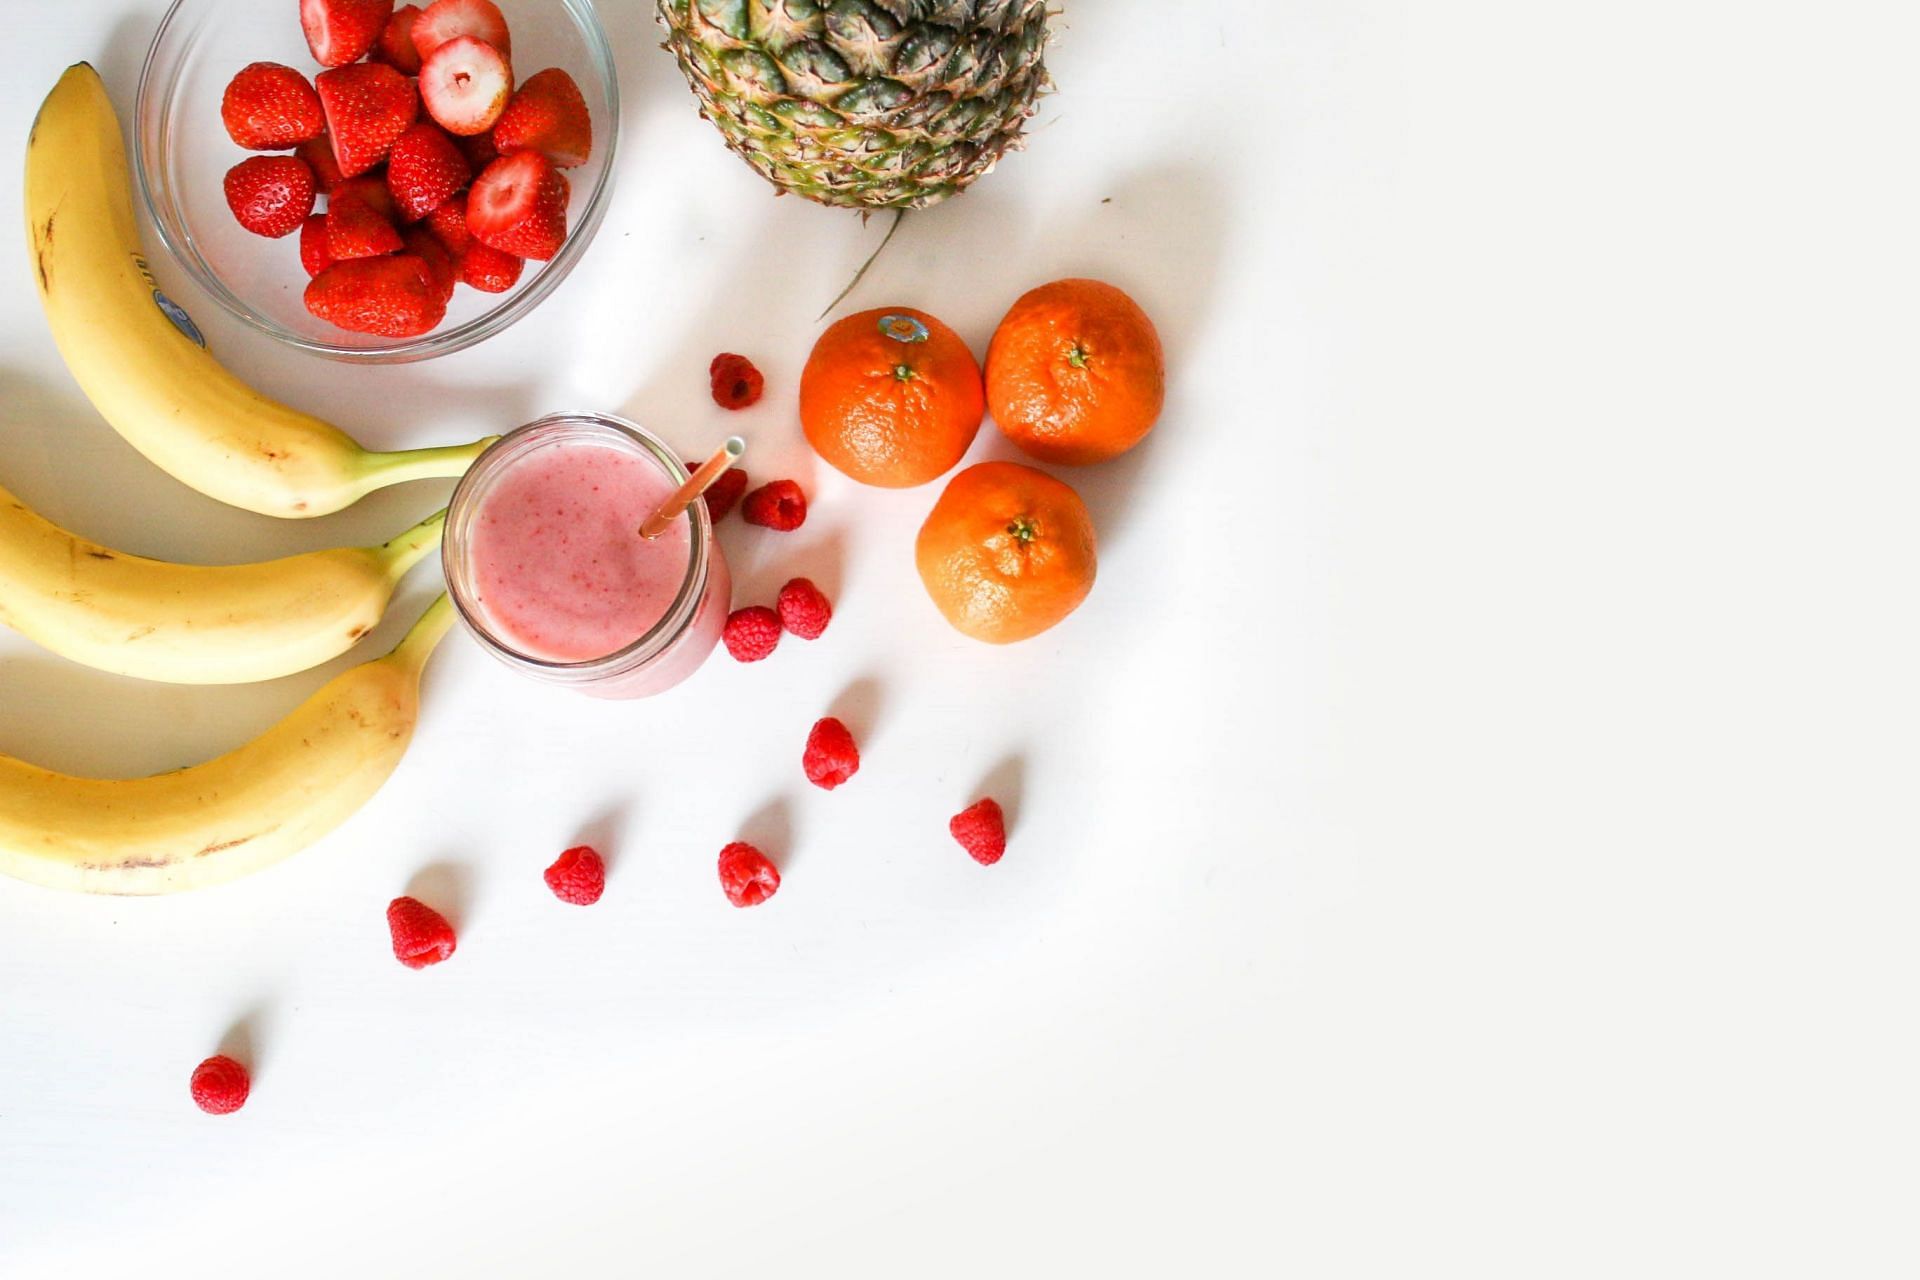 Foods high in Vitamin C must be consumed in moderation. (Image via Unsplash/ Element5 Digital)